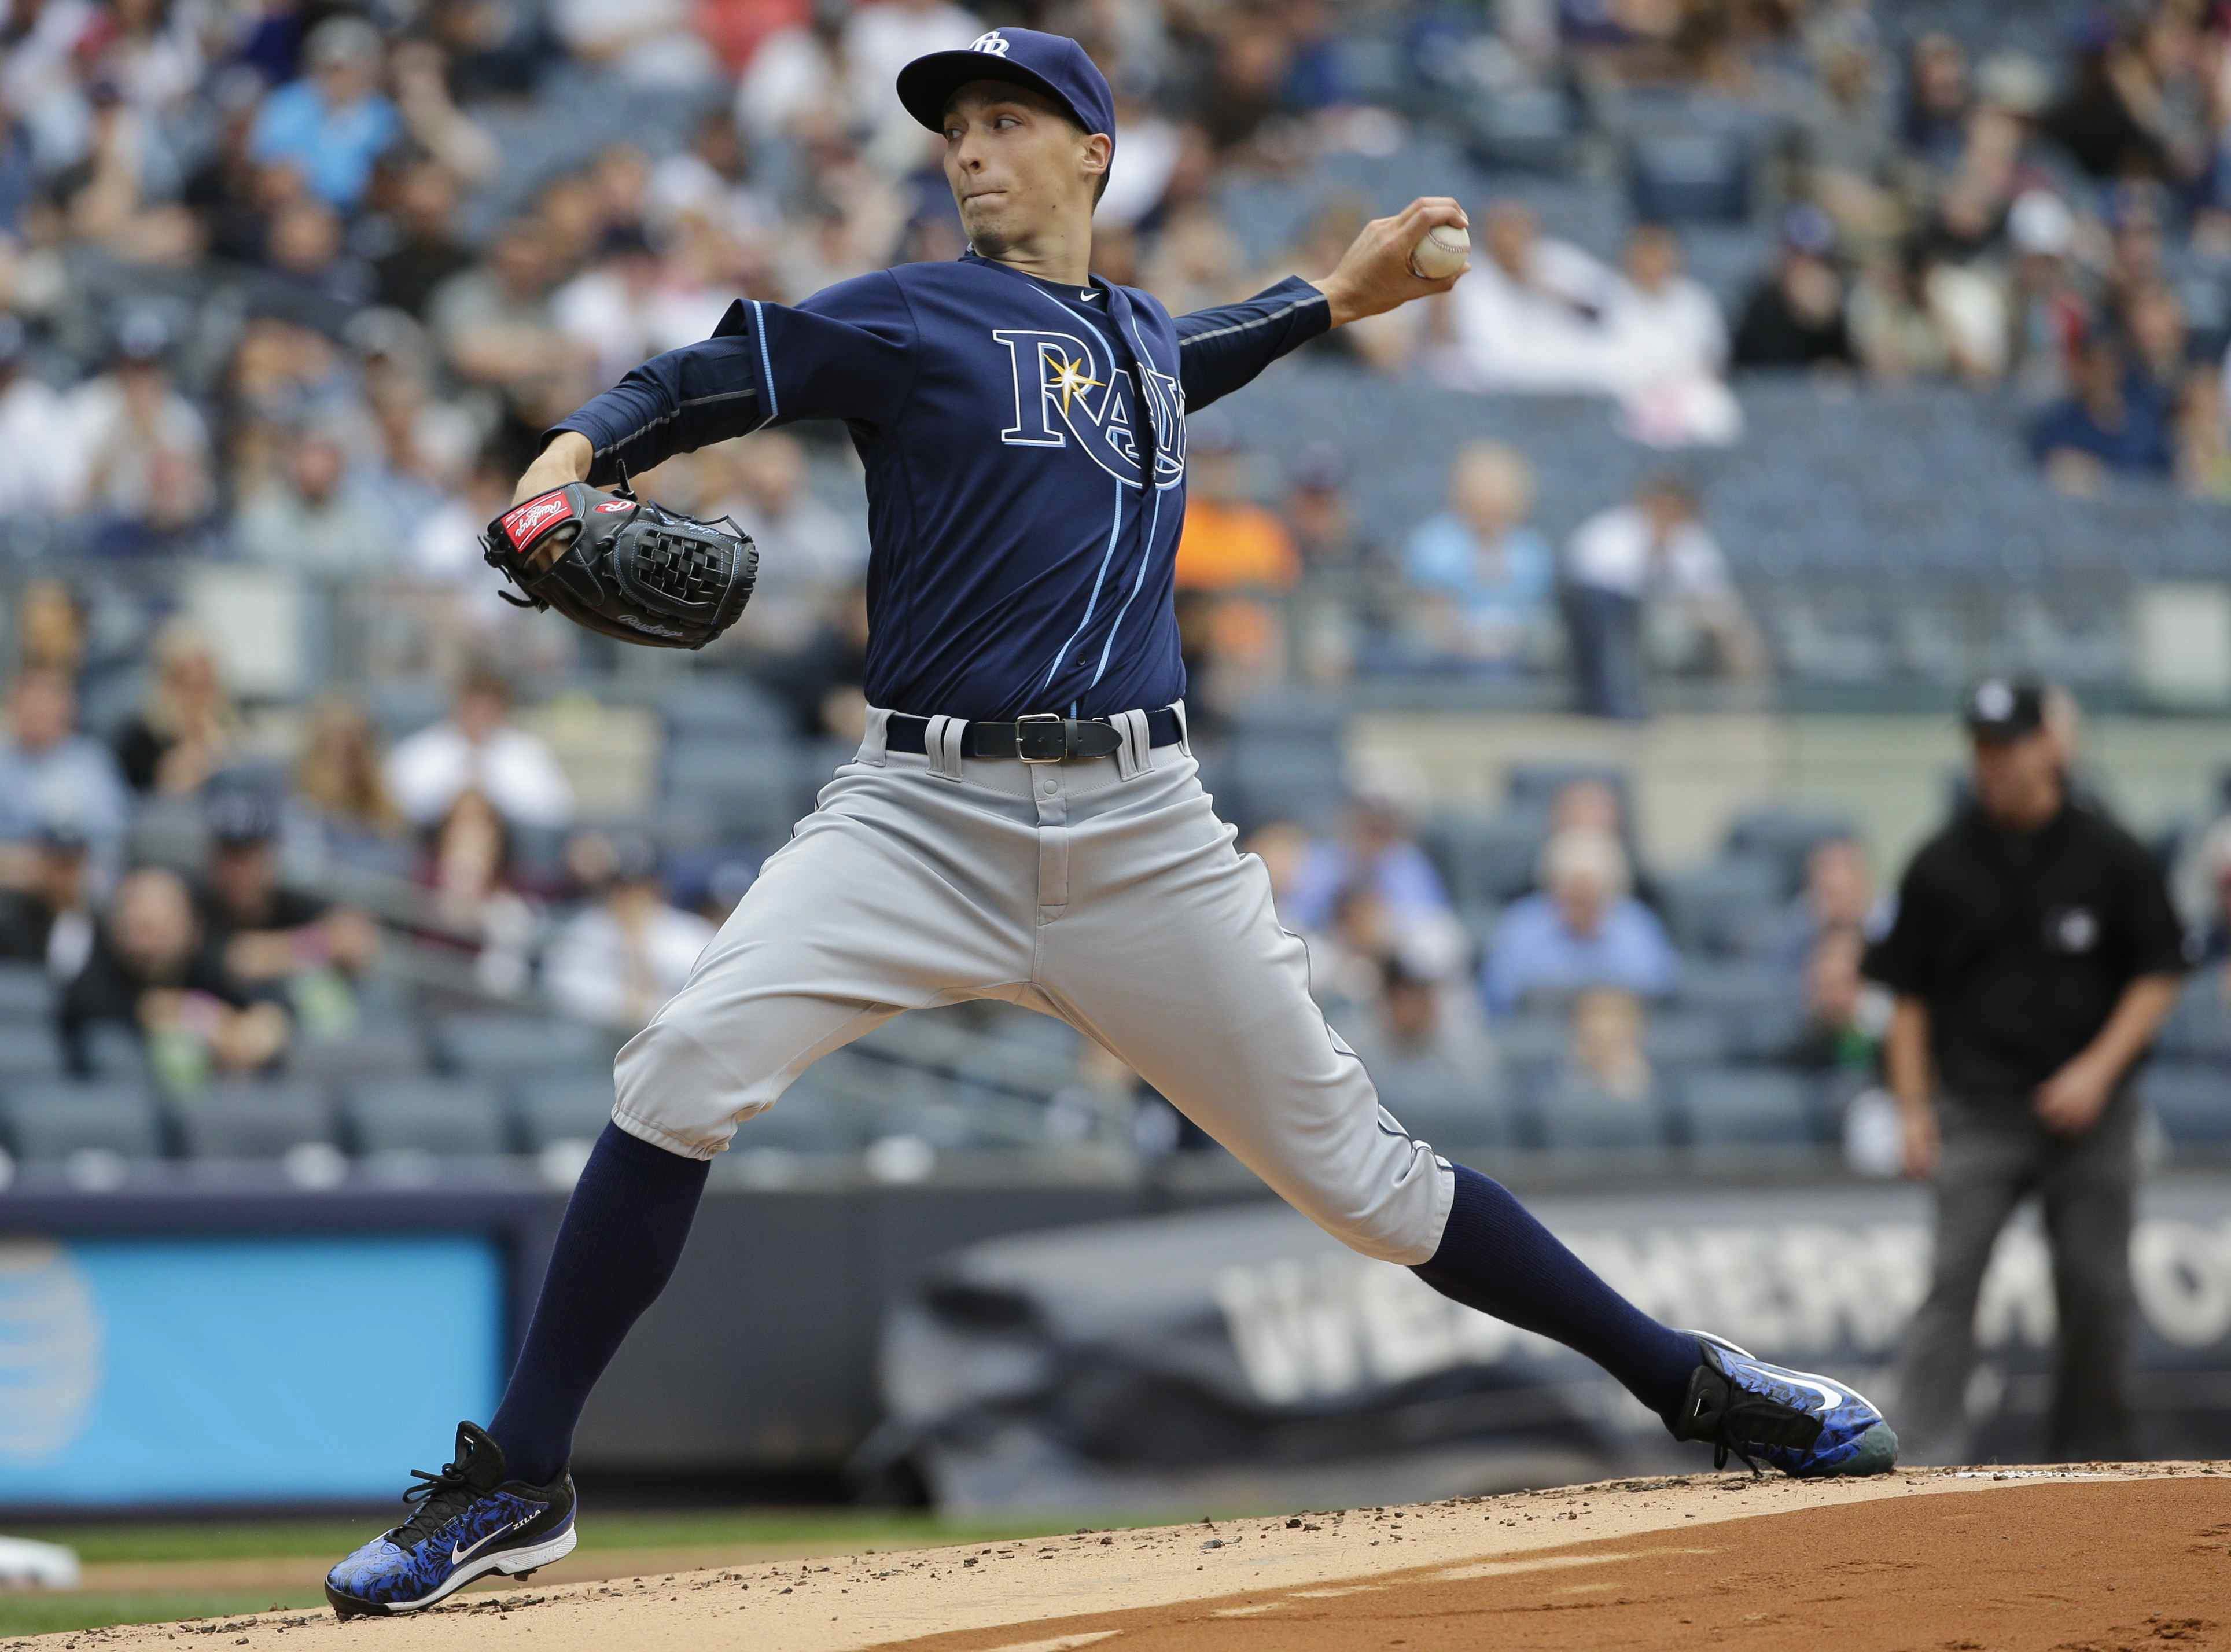 Blake Snell is set to make his second career start at Yankee Stadium tonight. (Photo Credit: TBO.com)